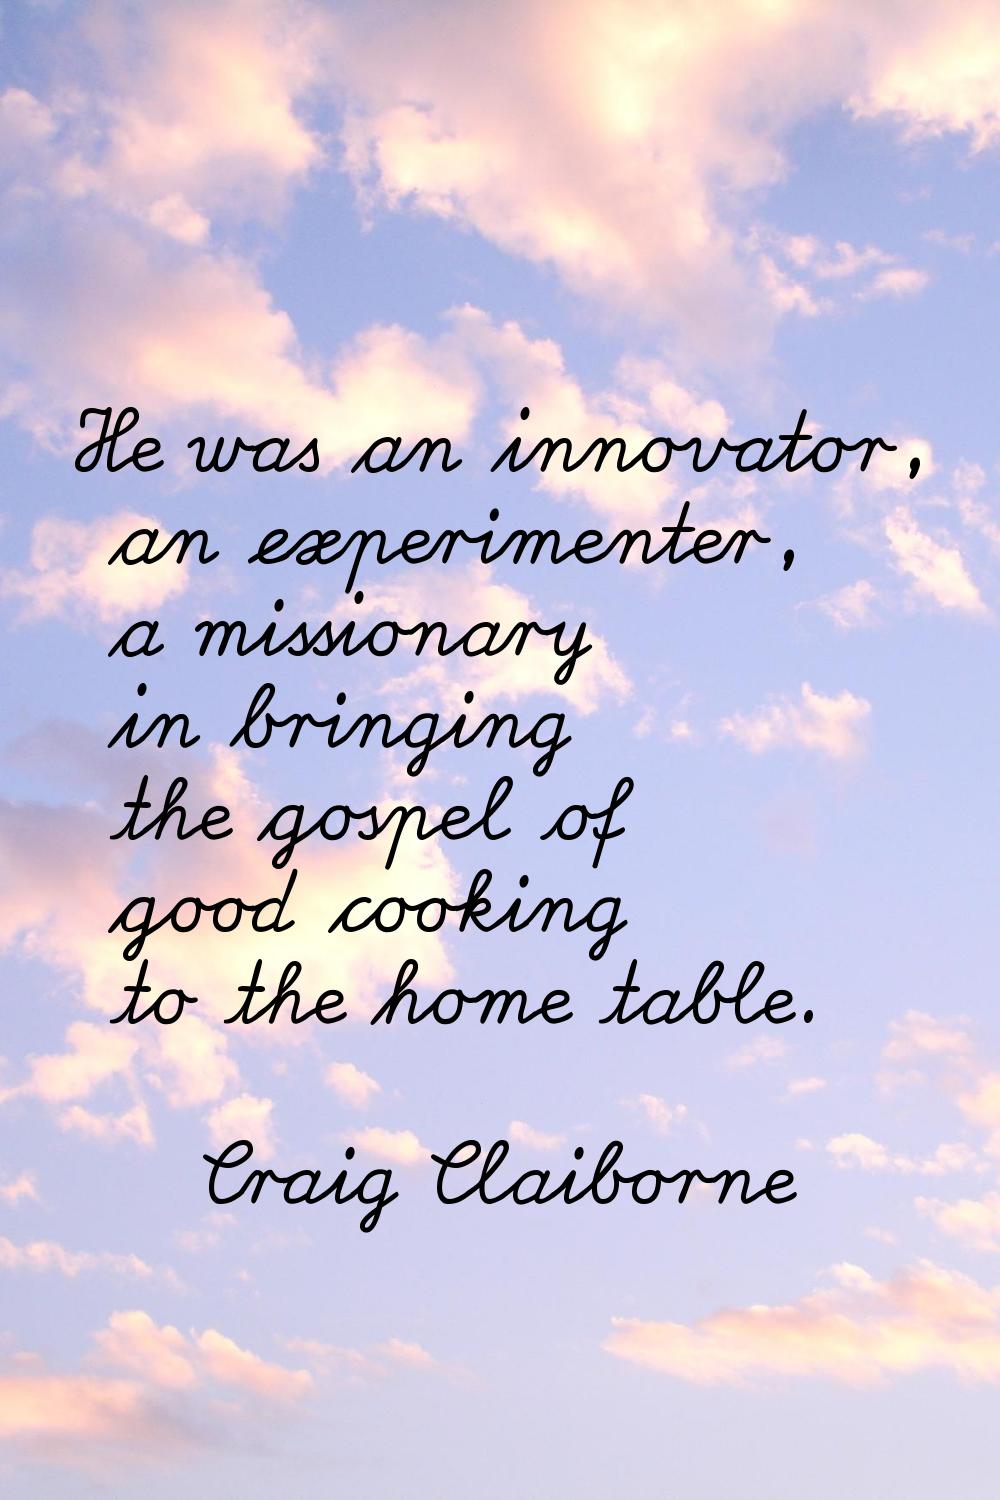 He was an innovator, an experimenter, a missionary in bringing the gospel of good cooking to the ho